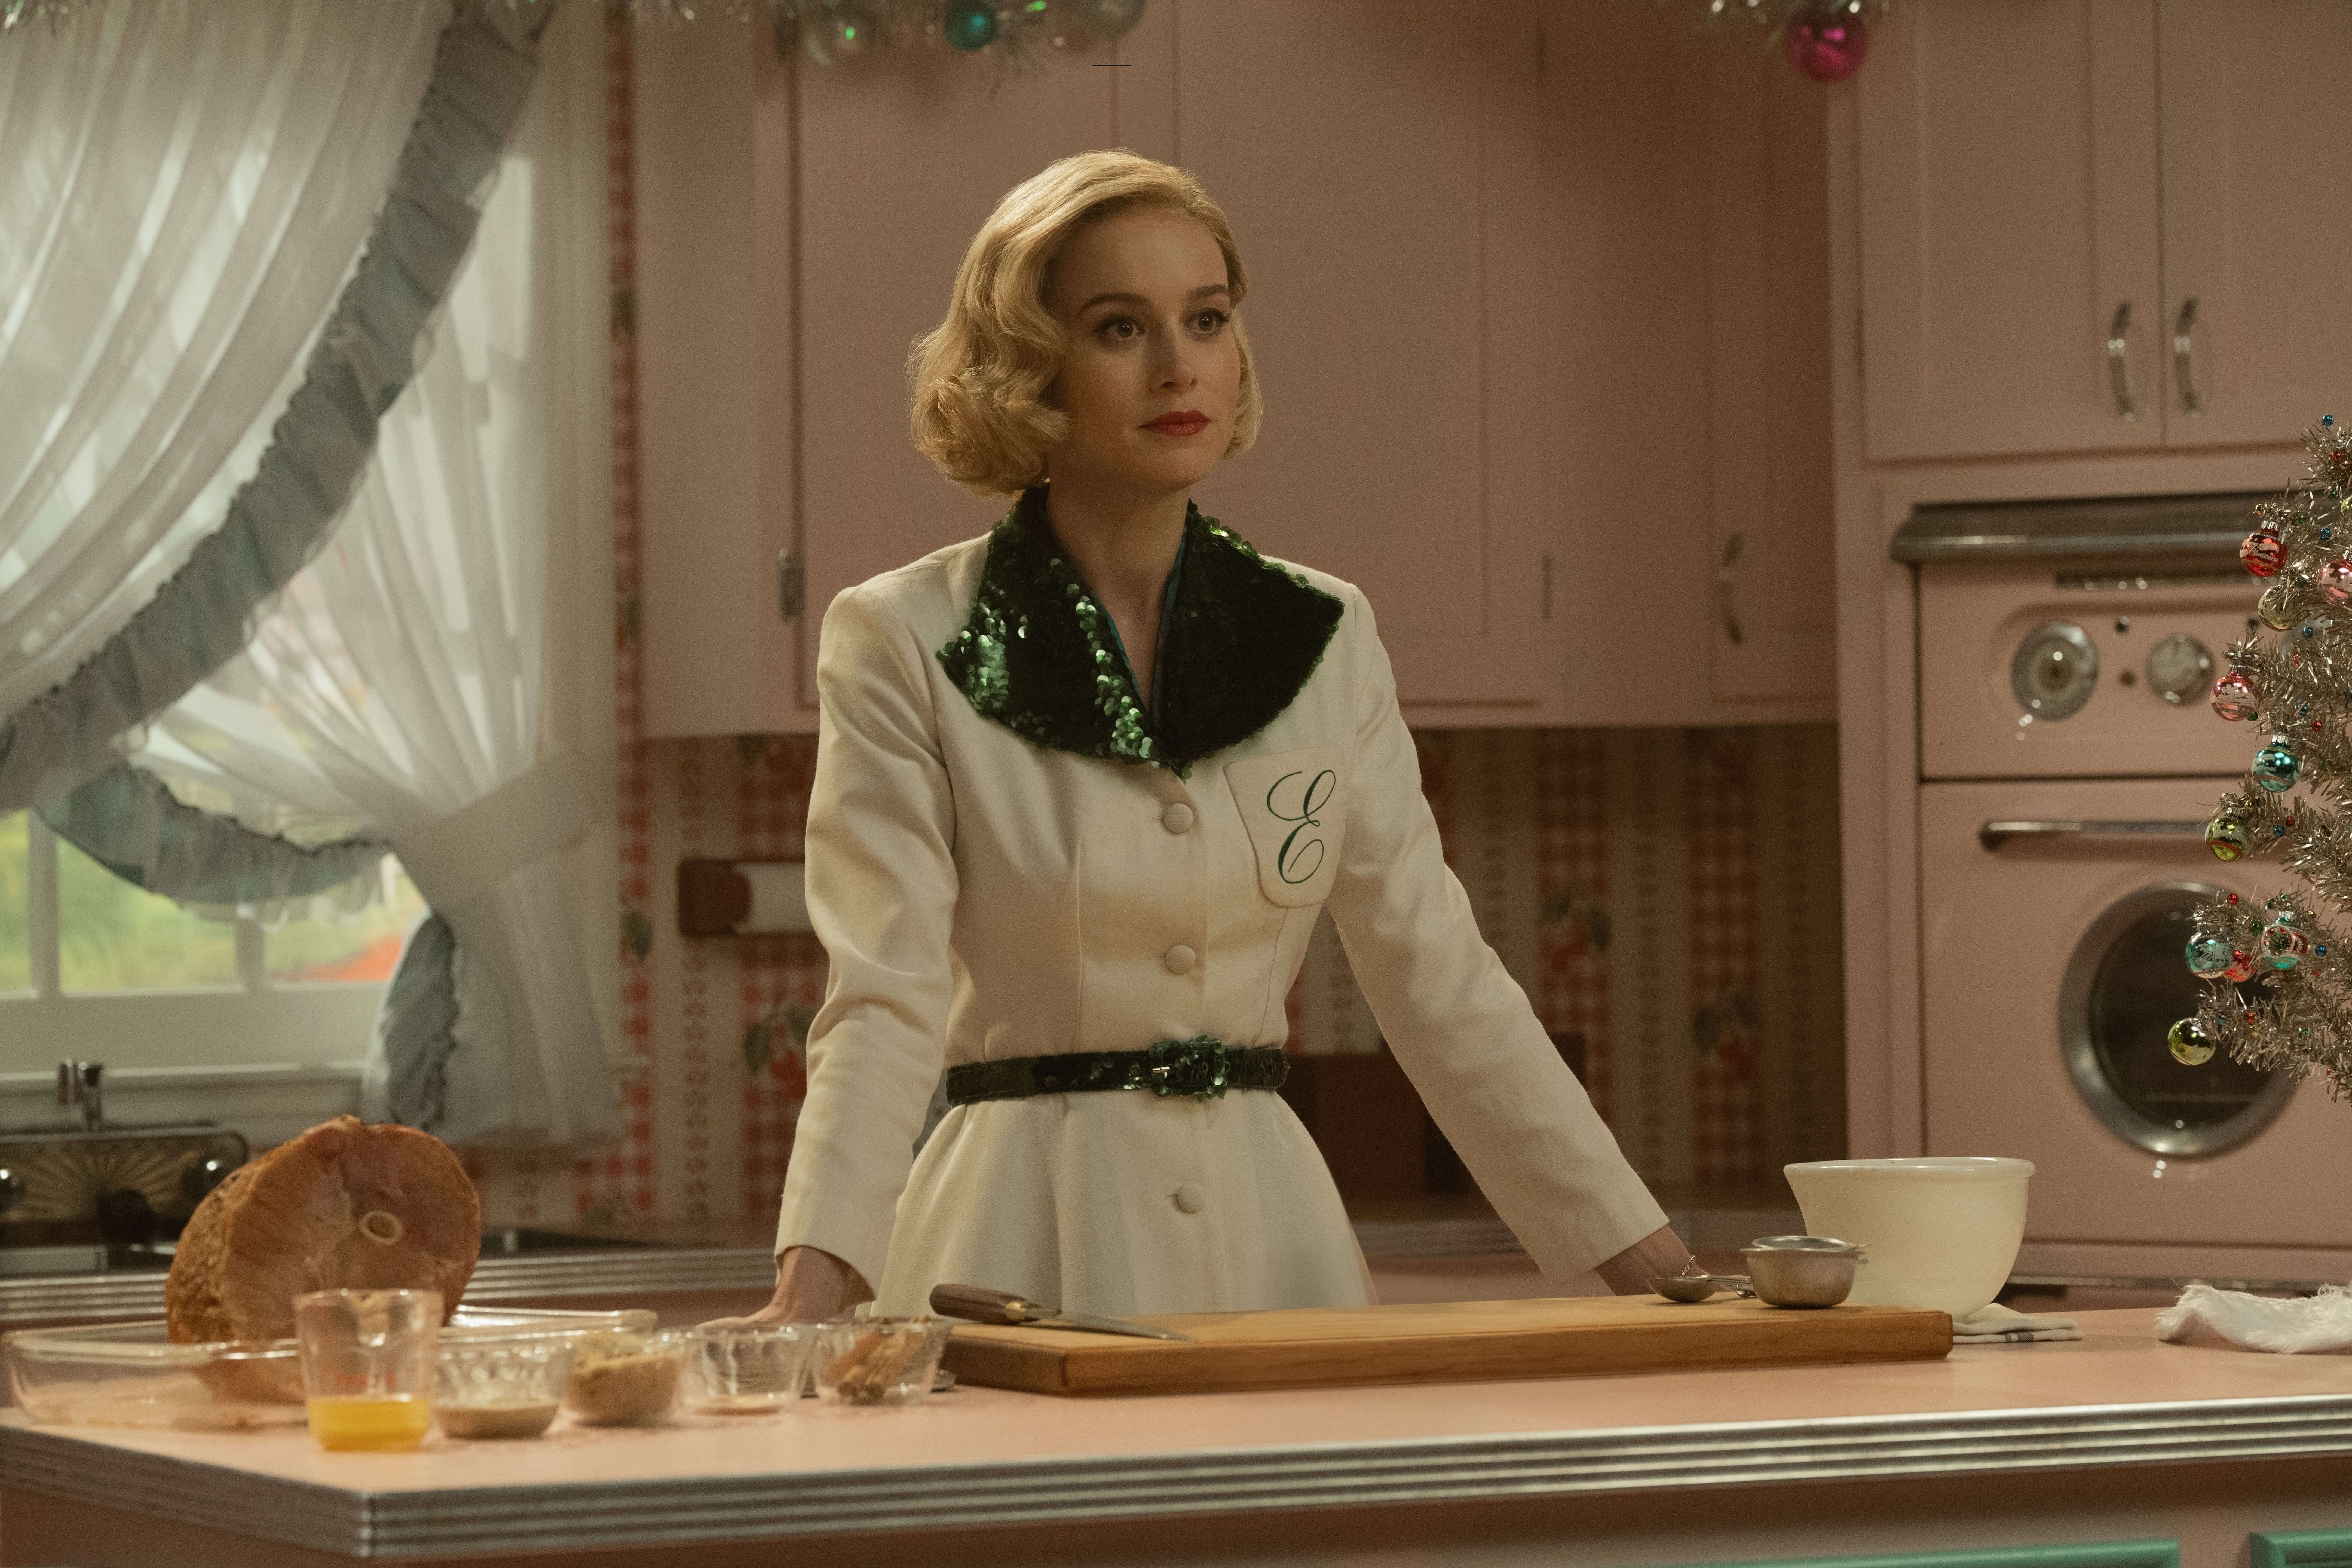 Brie Larson in a white 1950s shirt in the kitchen cooking.